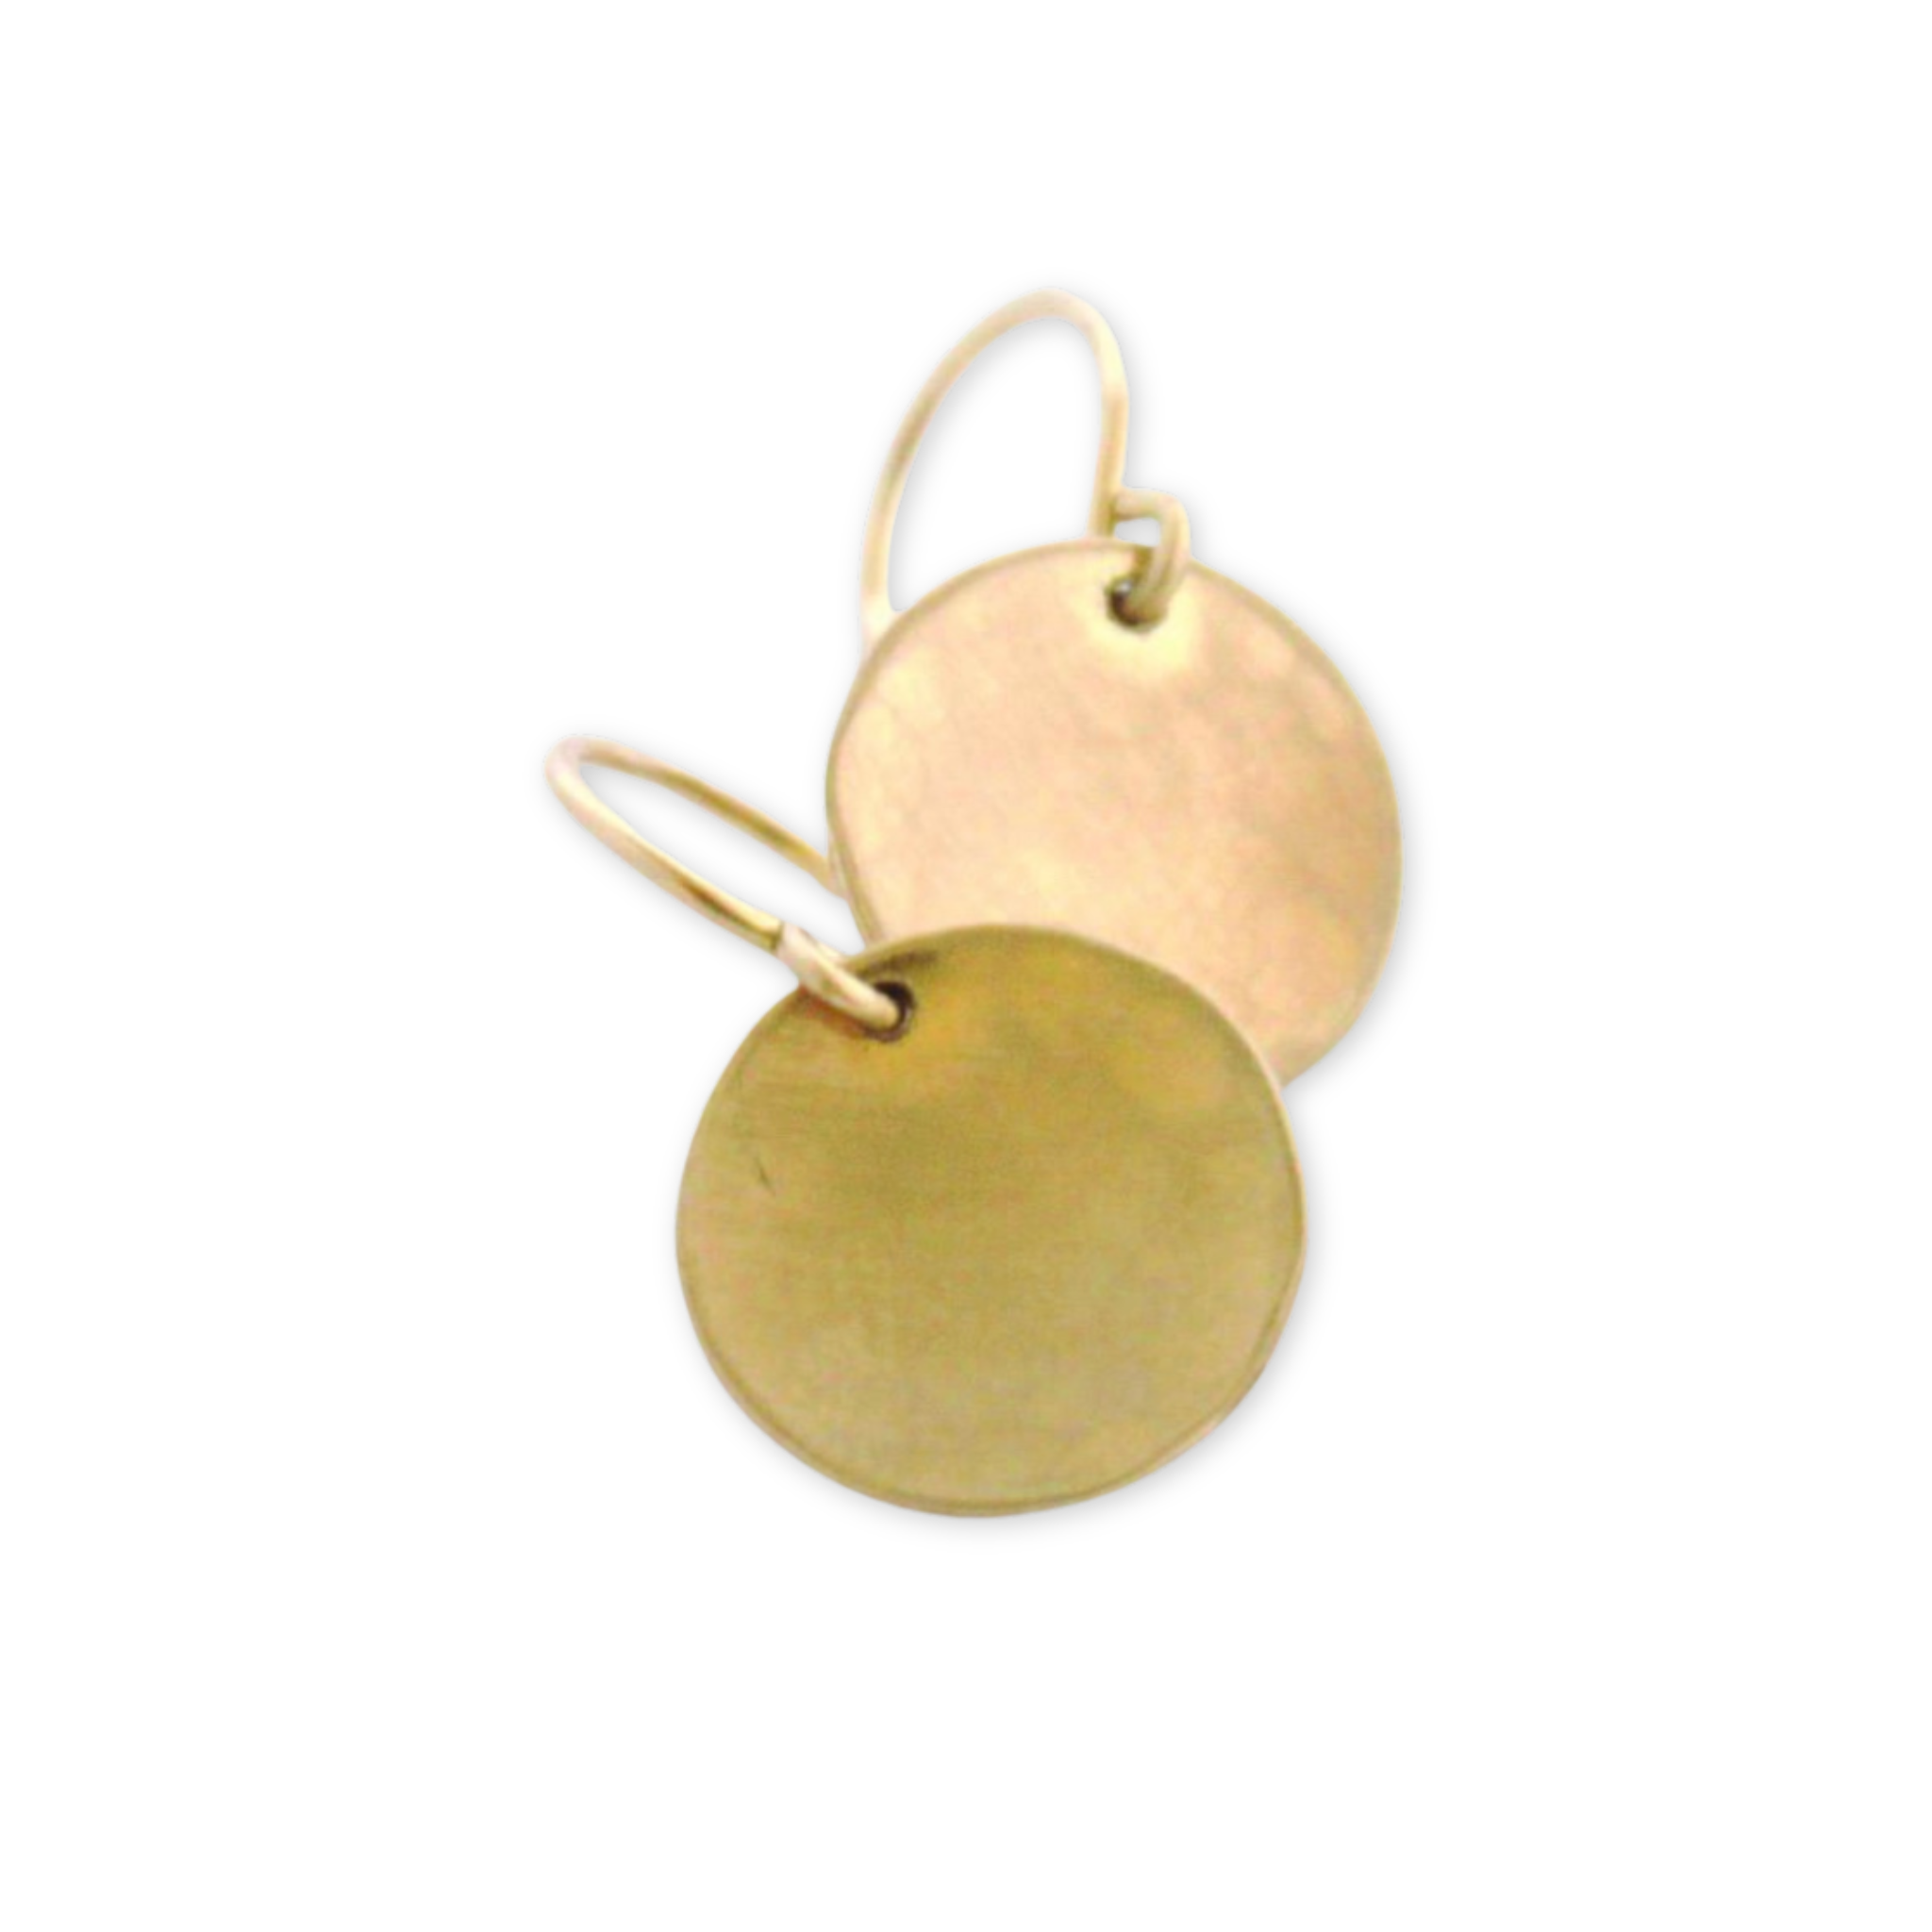 small hammered disc earrings with a satin finish